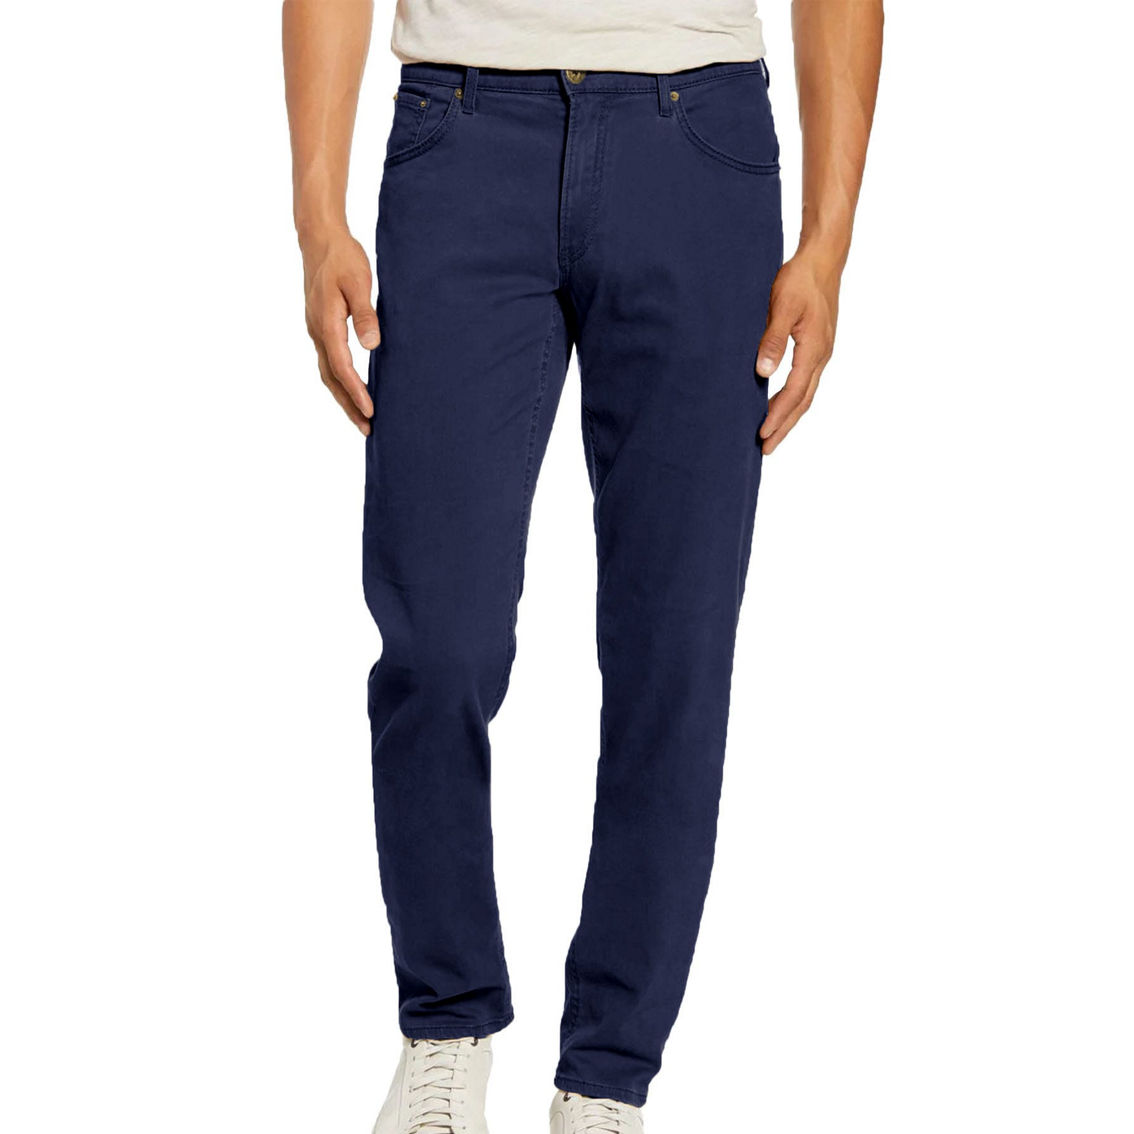 7 Groove Men's 5 Pocket Stretch Chino Pants | Pants | Clothing ...